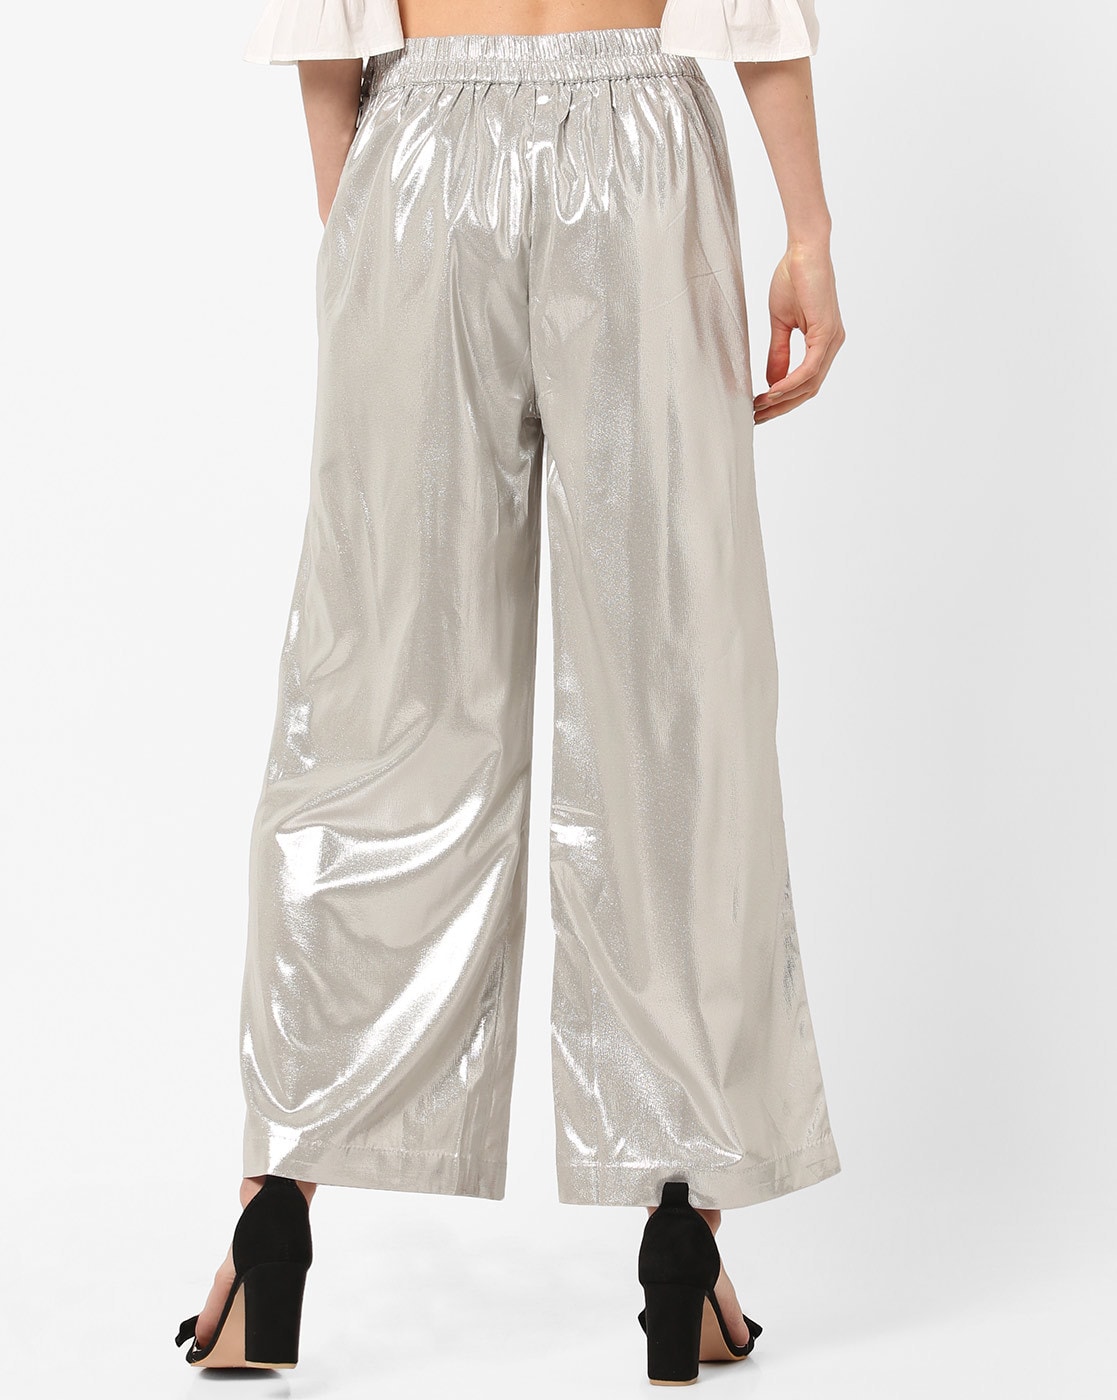 Buy WUDODO Womens Shiny Wide Leg Pants Metallic Loose Palazzo Pants Party  Club Long Pants Trousers with Pockets Gold Large at Amazonin